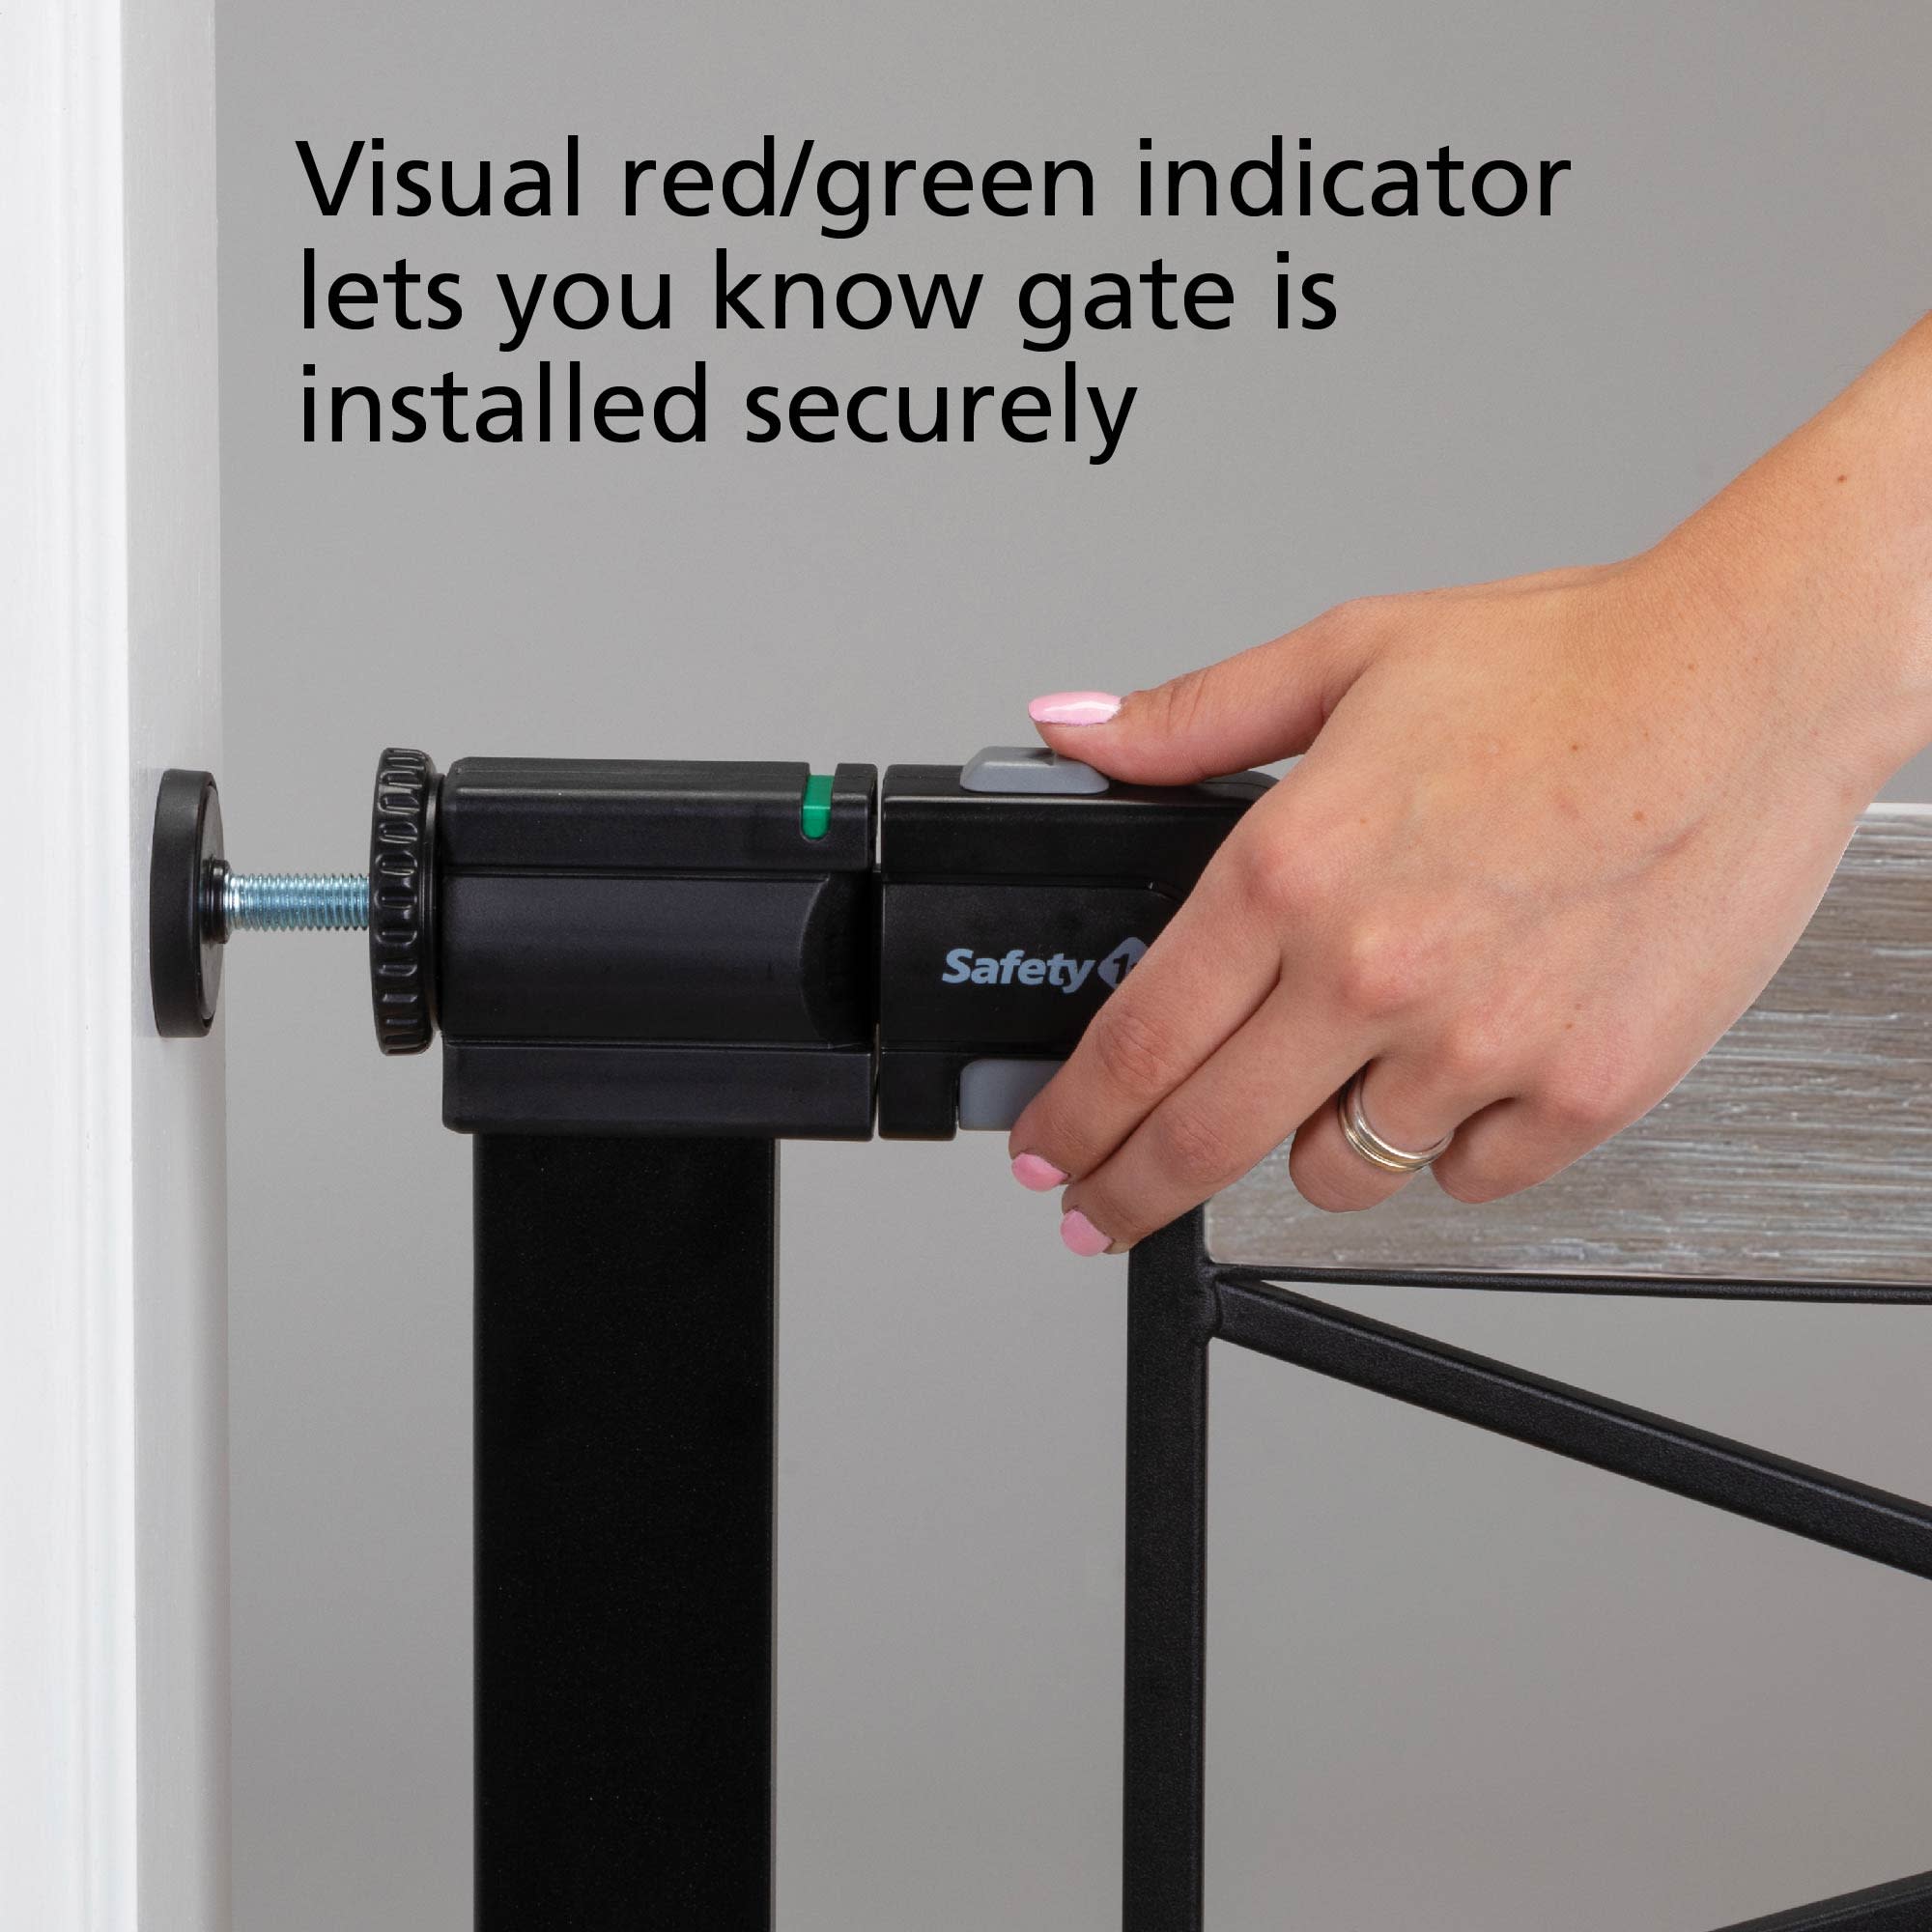 Farmhouse Walk-Through Gate (Grey) - visual red/green indicator lets you know gate is installed securely